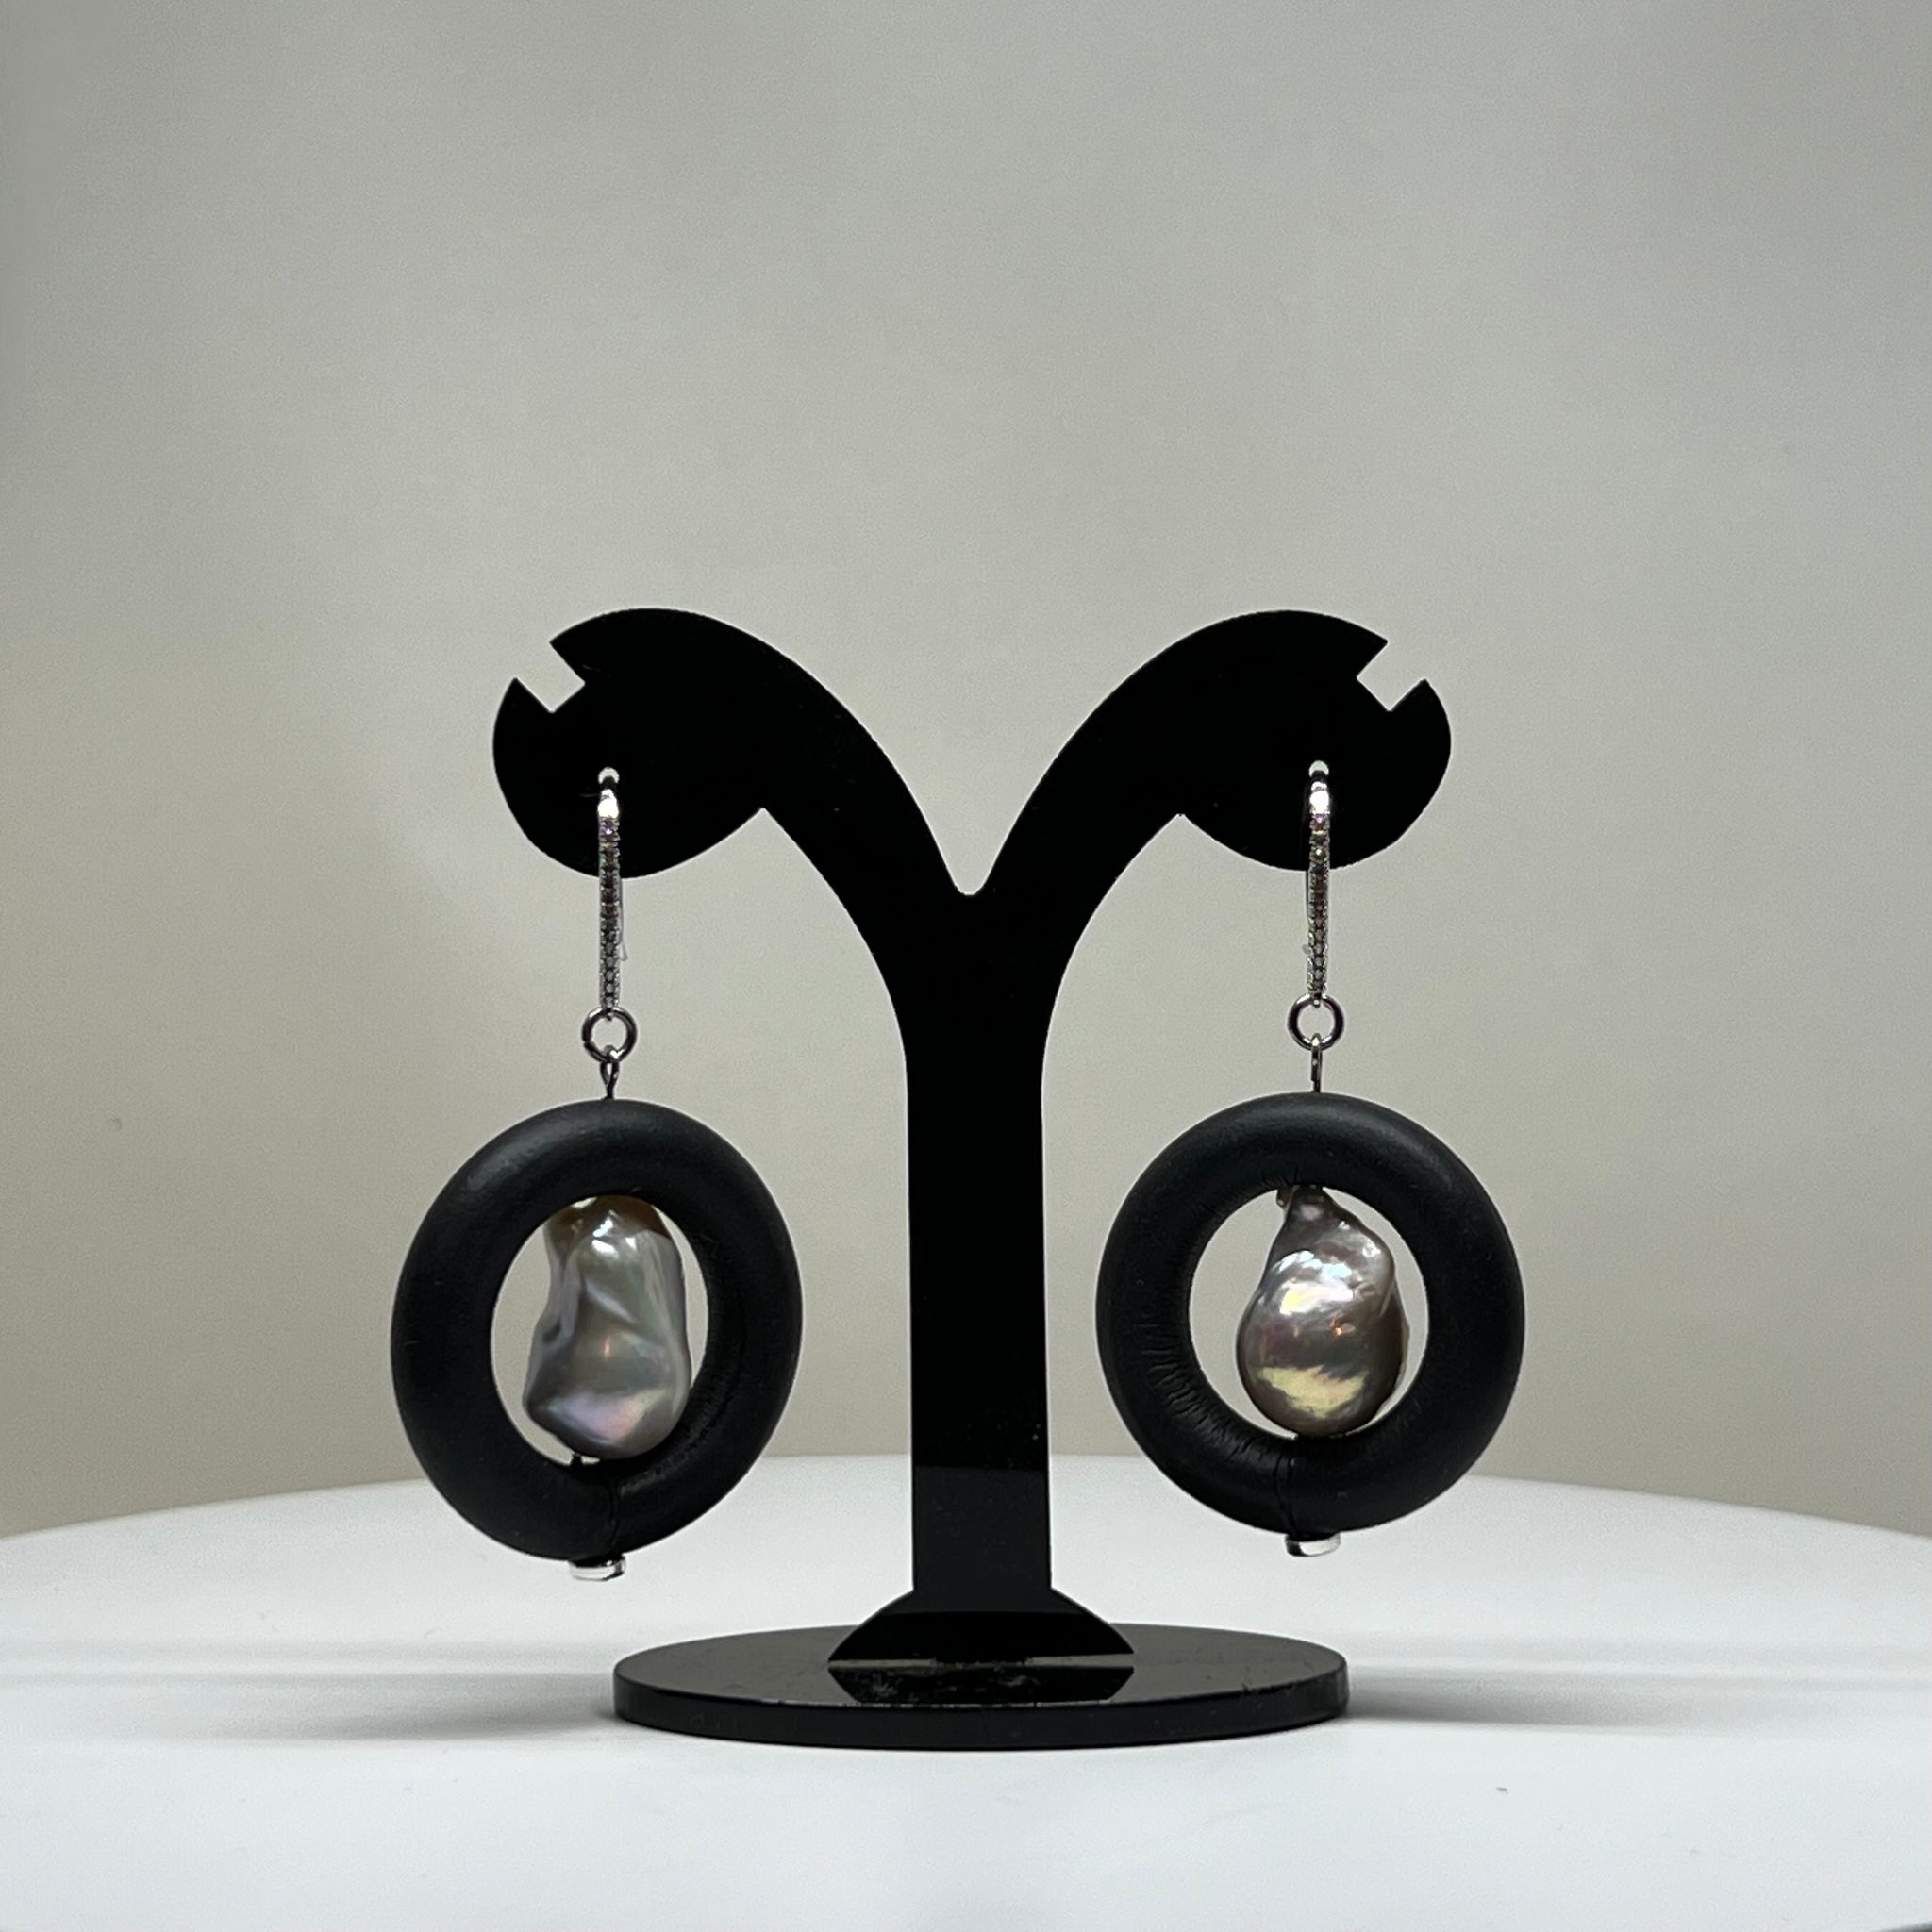 BLACK RUBBER EARRINGS WITH GENUINE BAROQUE PEARLS AND SILVER ENDCAPS. by nyet jewelry 